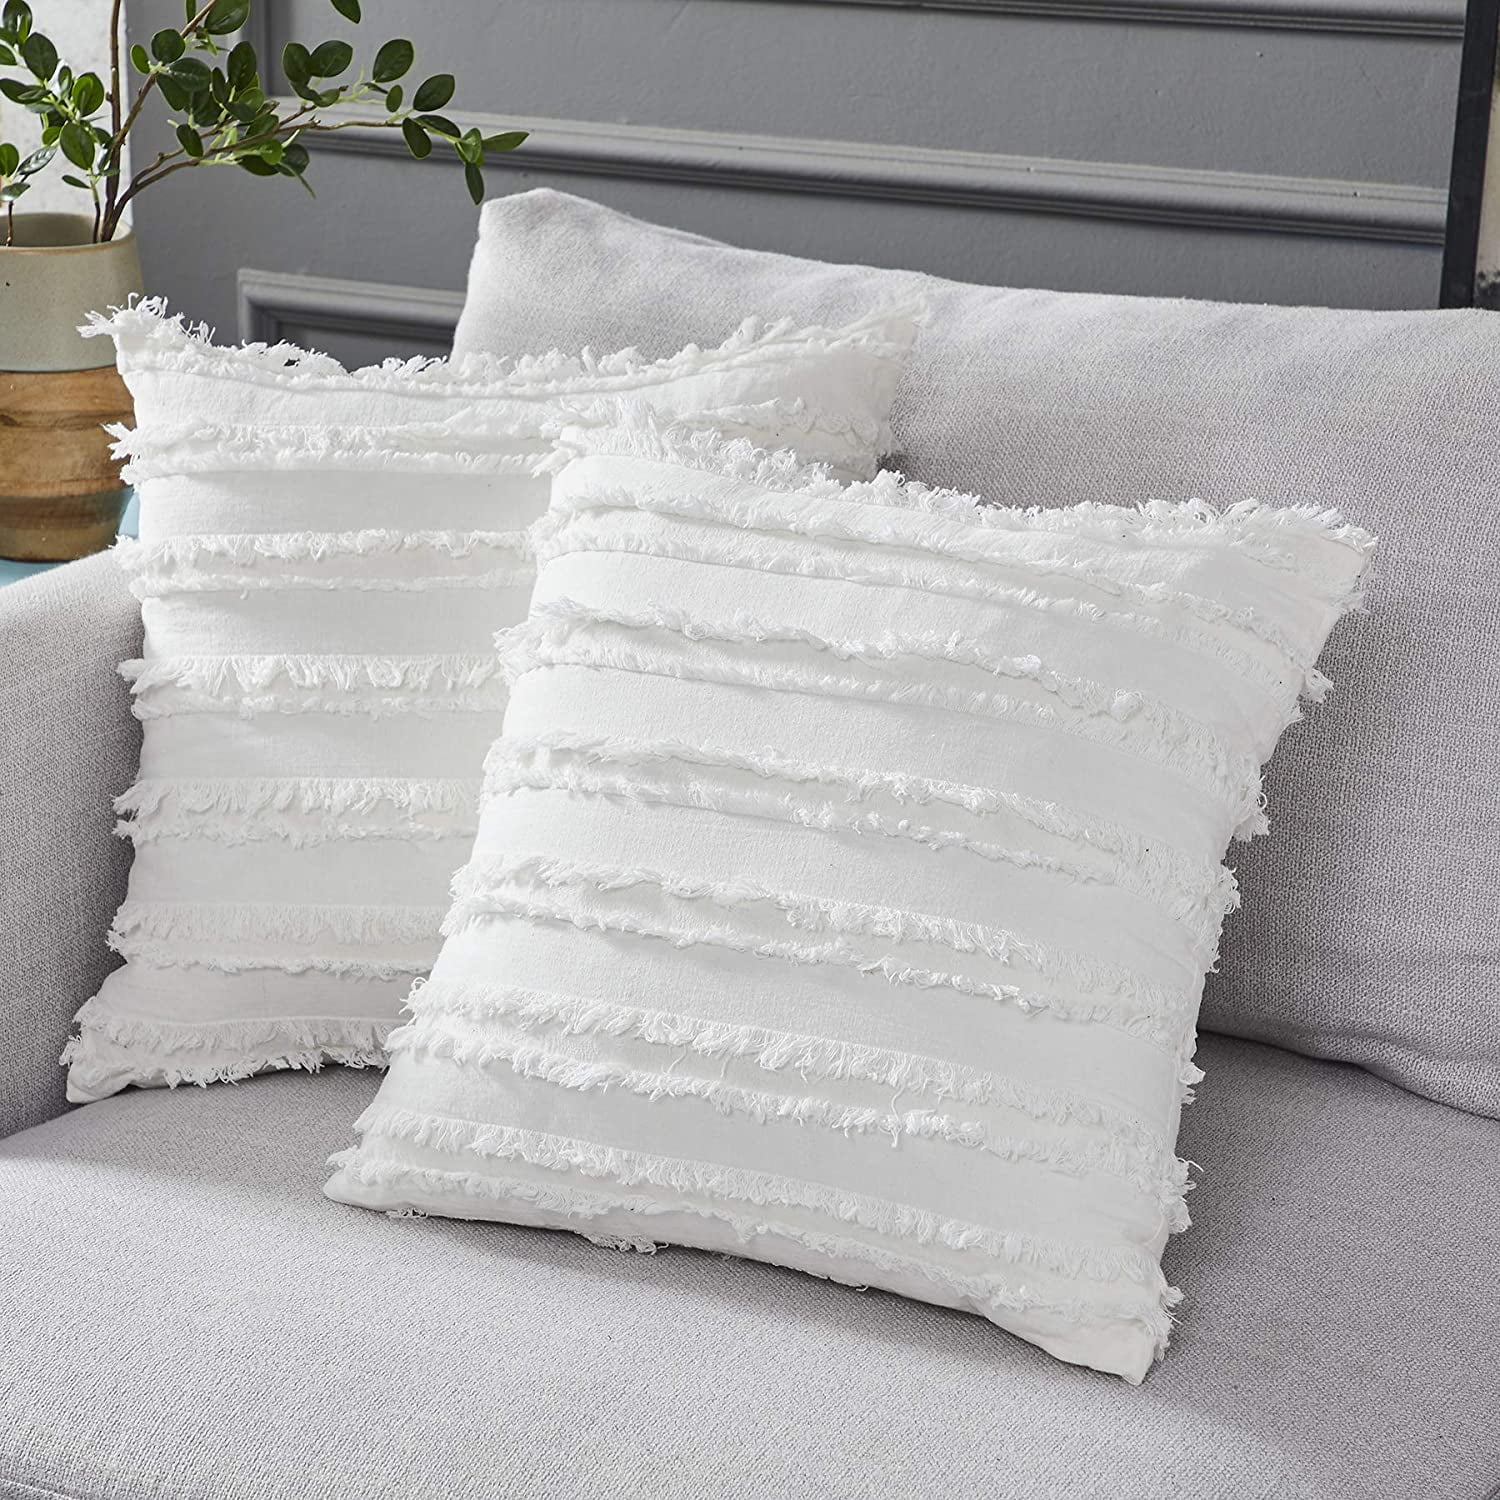 2pcs Ivory White Throw Pillow Covers For Sofa,coush,bedroom,Family Room  Decorative Pillows 20*20 Inches Linen Cushion Covers ,No Serts